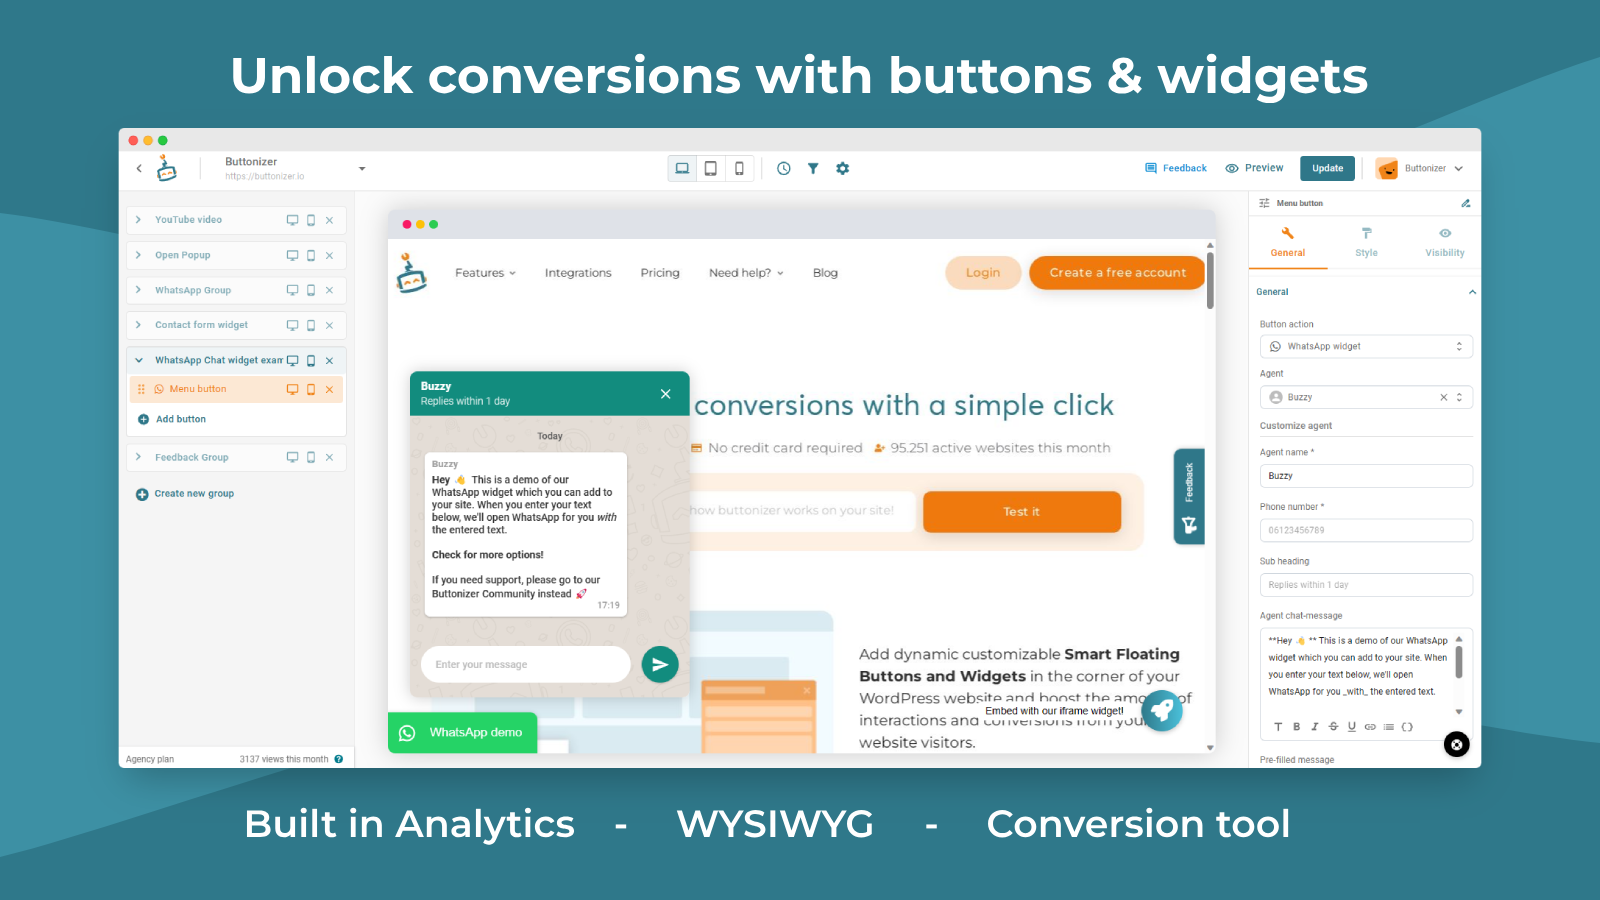 Unlock conversions with buttons & widgets